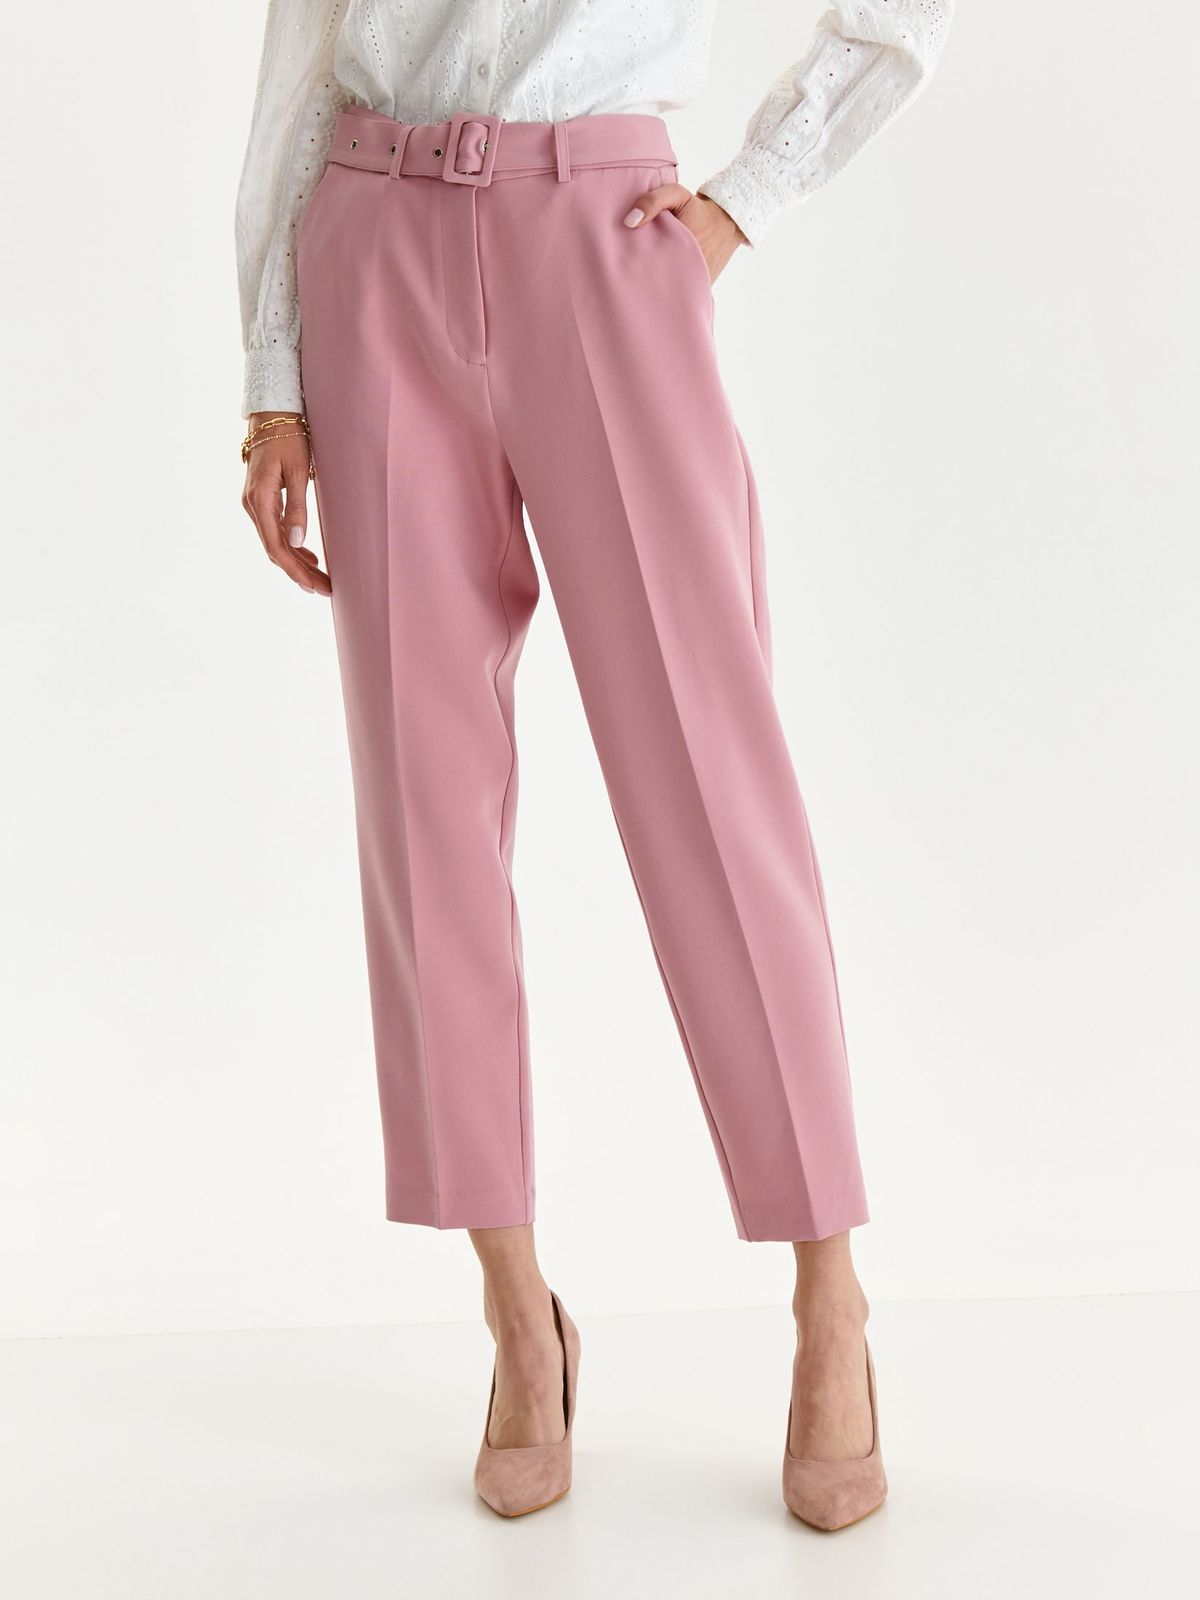 Lightpink trousers slightly elastic fabric straight accessorized with belt